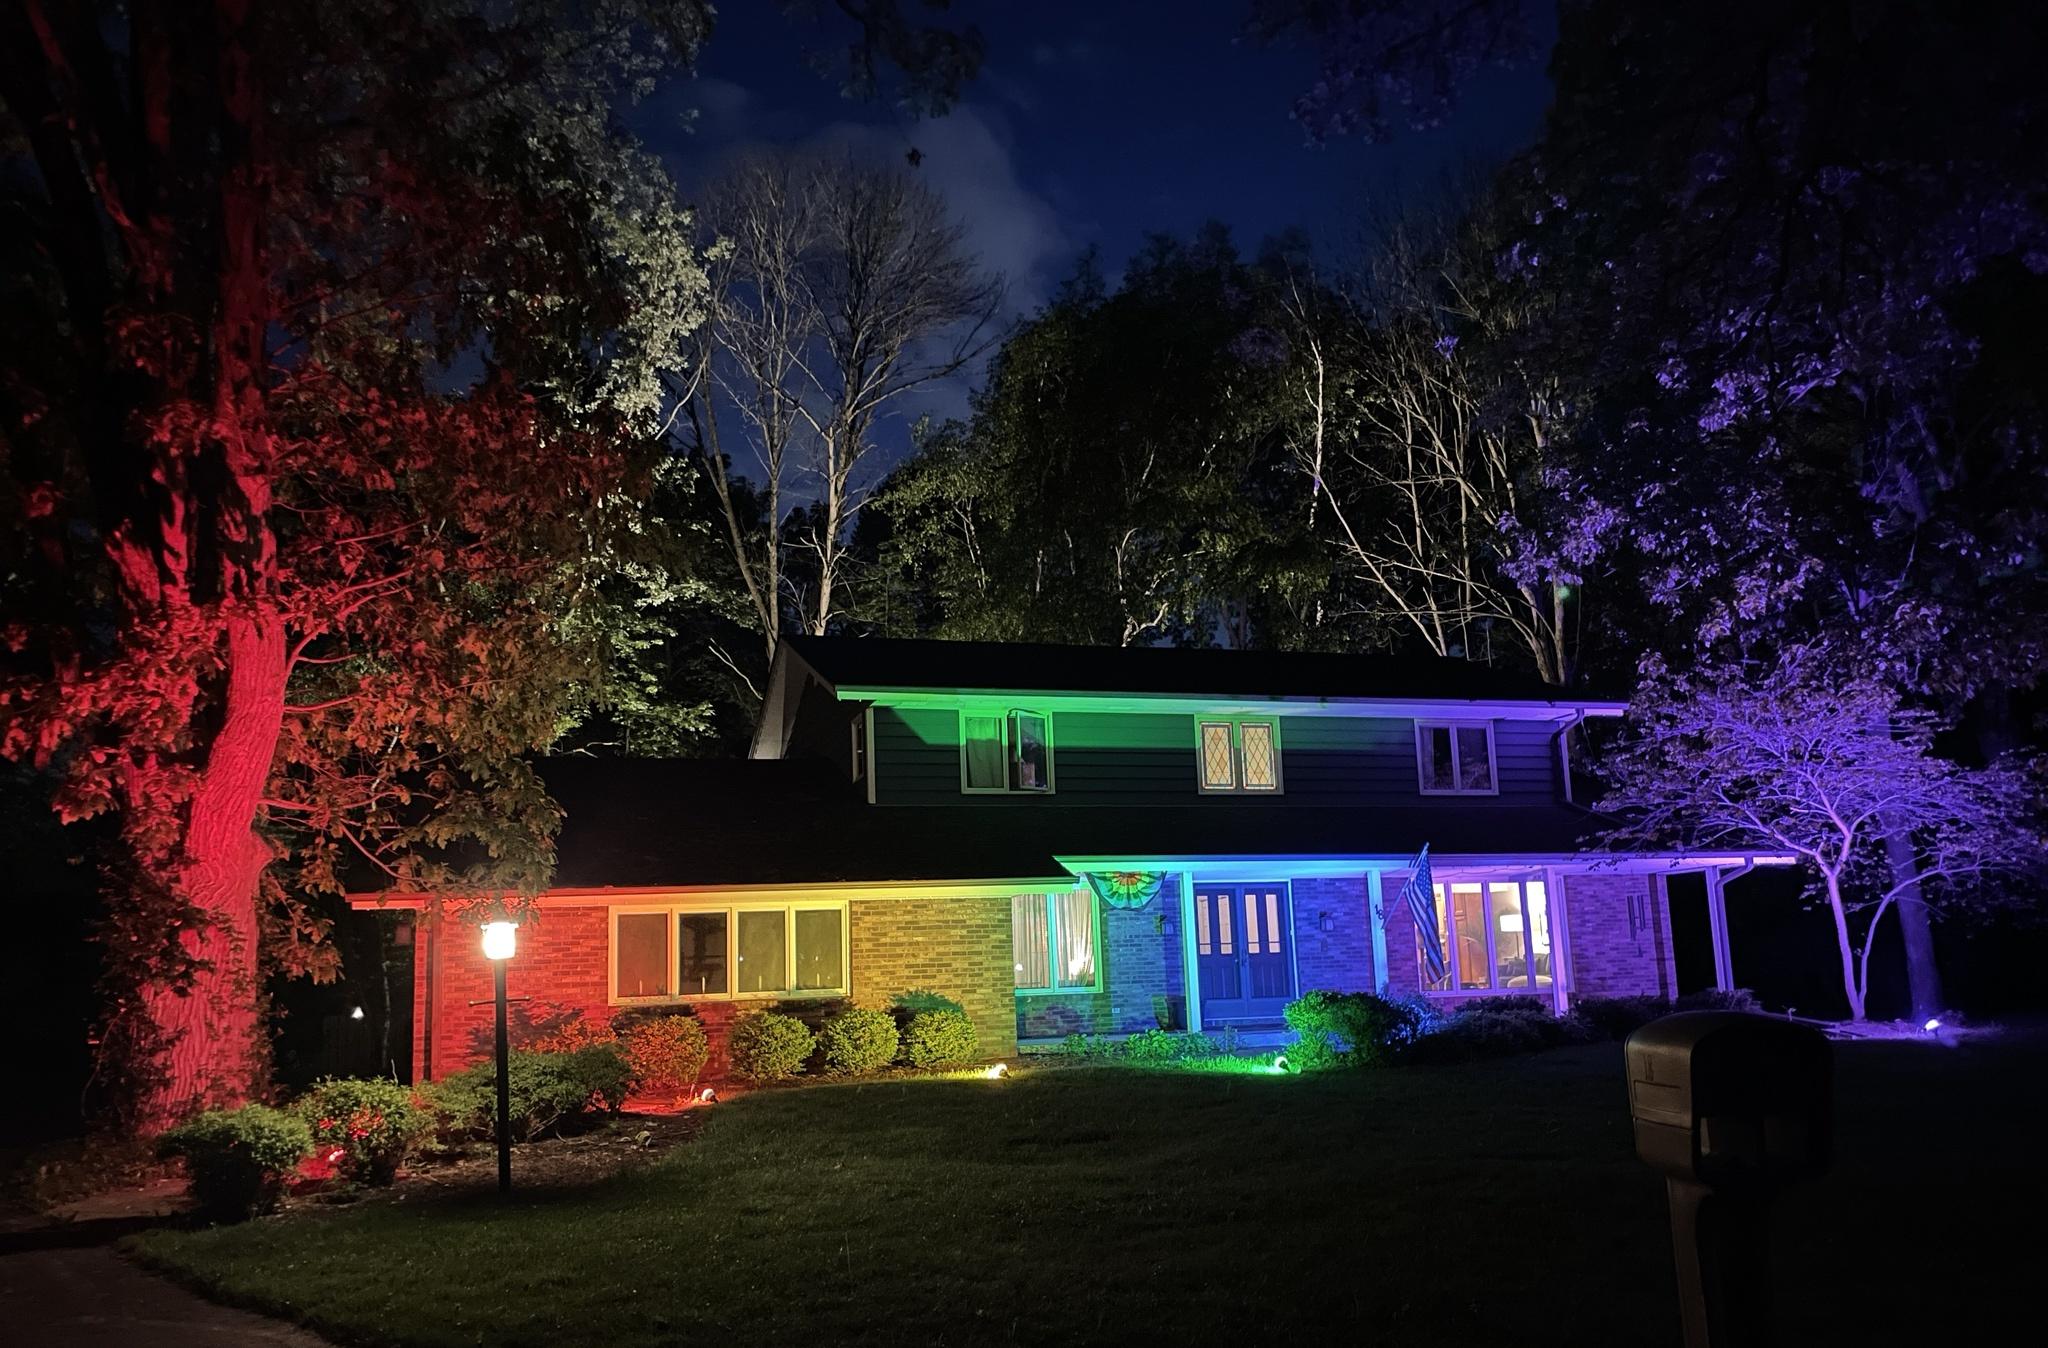 Reddit user memon17 posted this photo of their Wisconsin home after the HOA told them to take down a Pride flag.